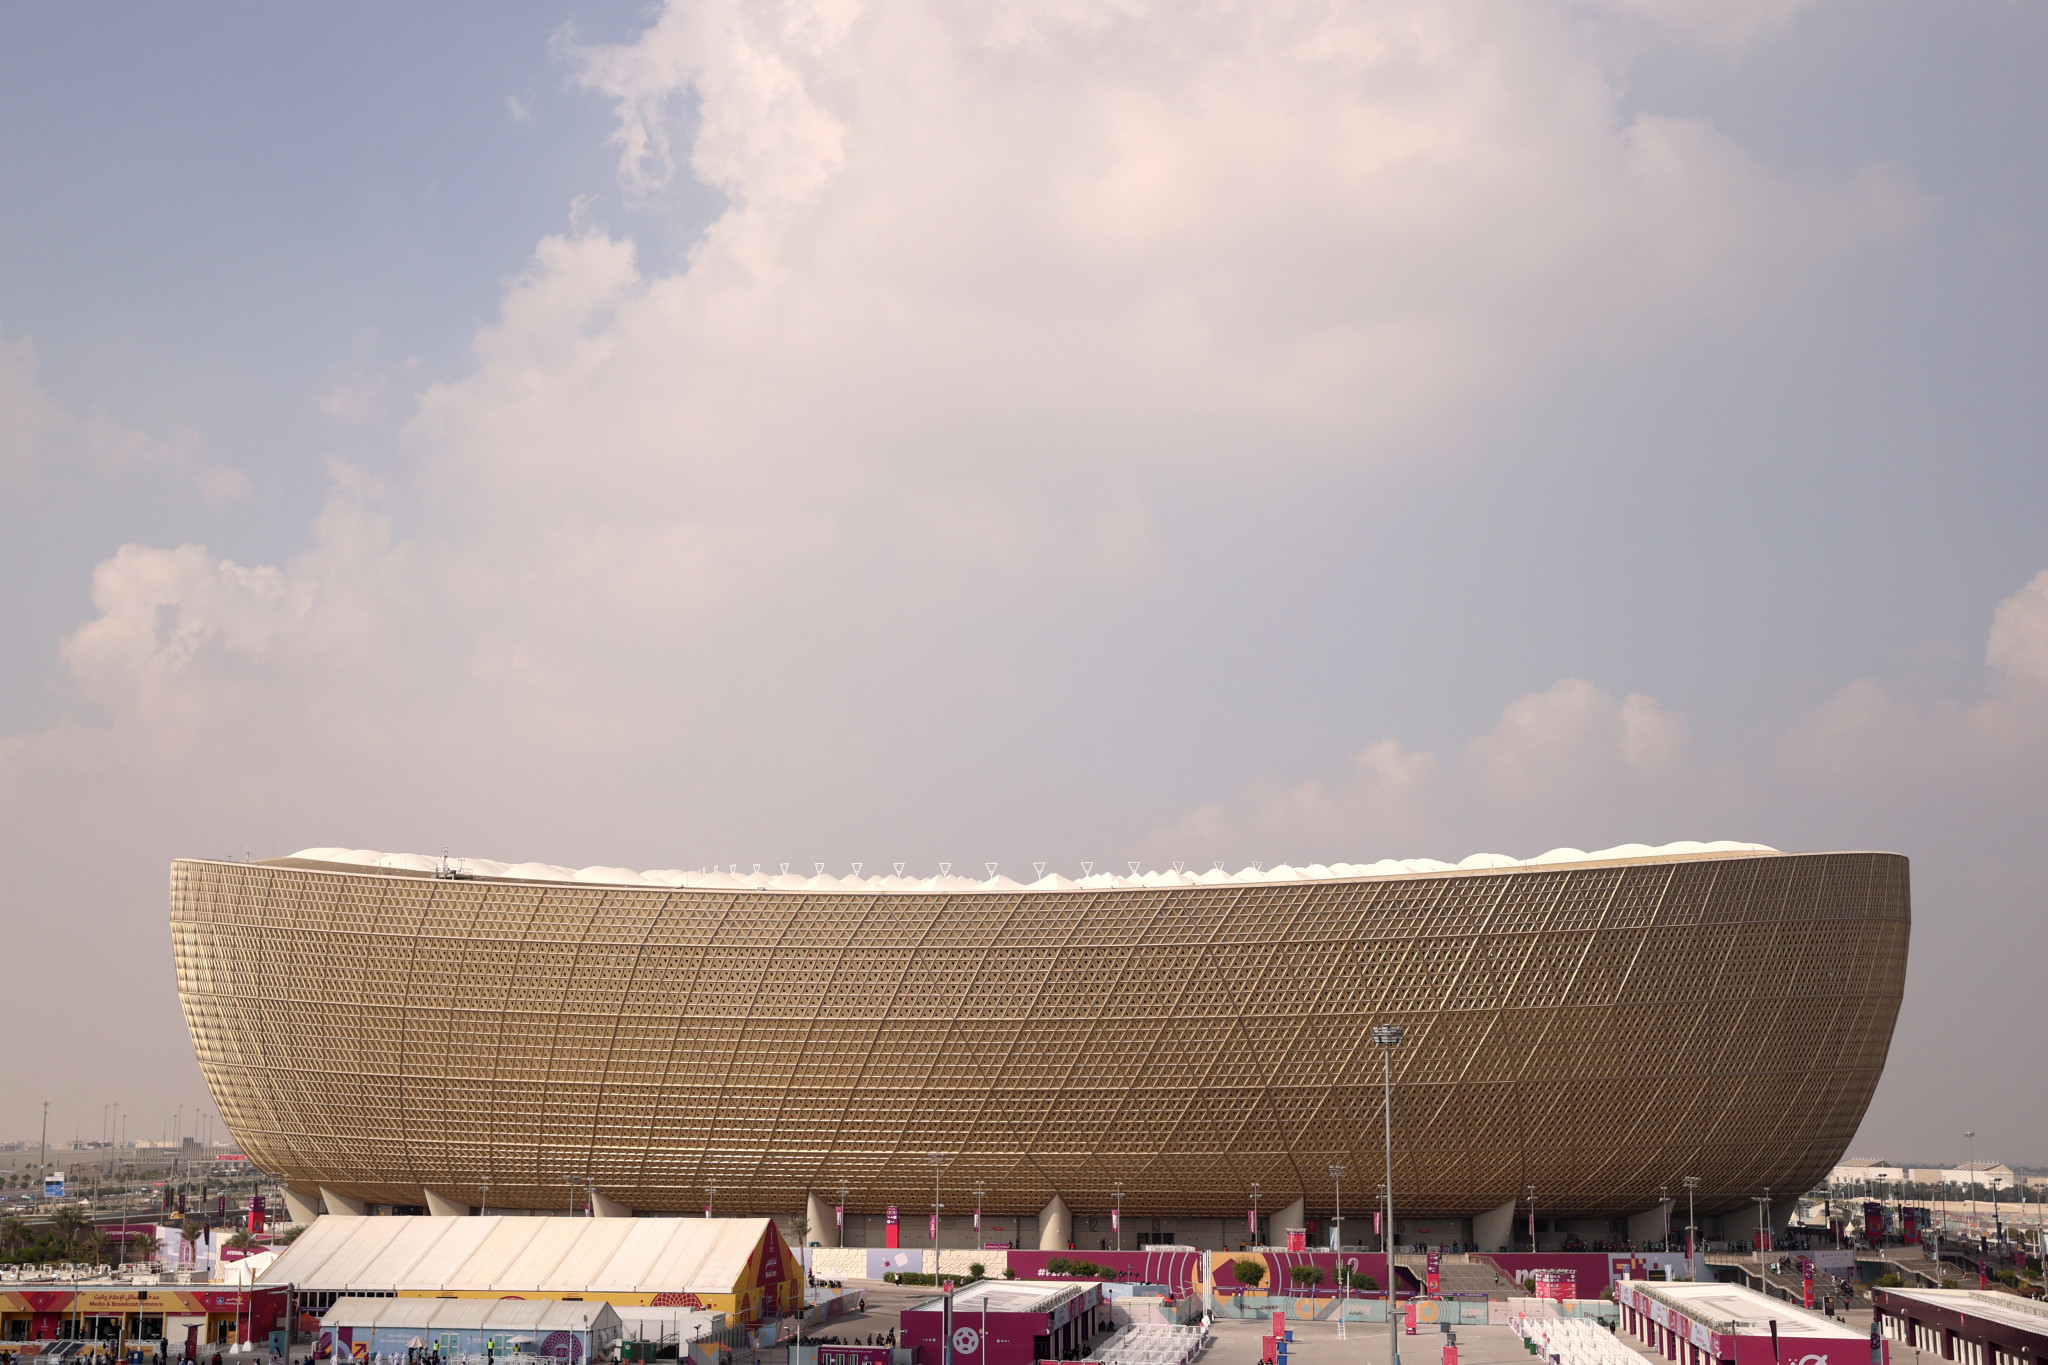 Qatar boats a number of world-class stadia after staging the 2022 FIFA World Cup ©Getty Images